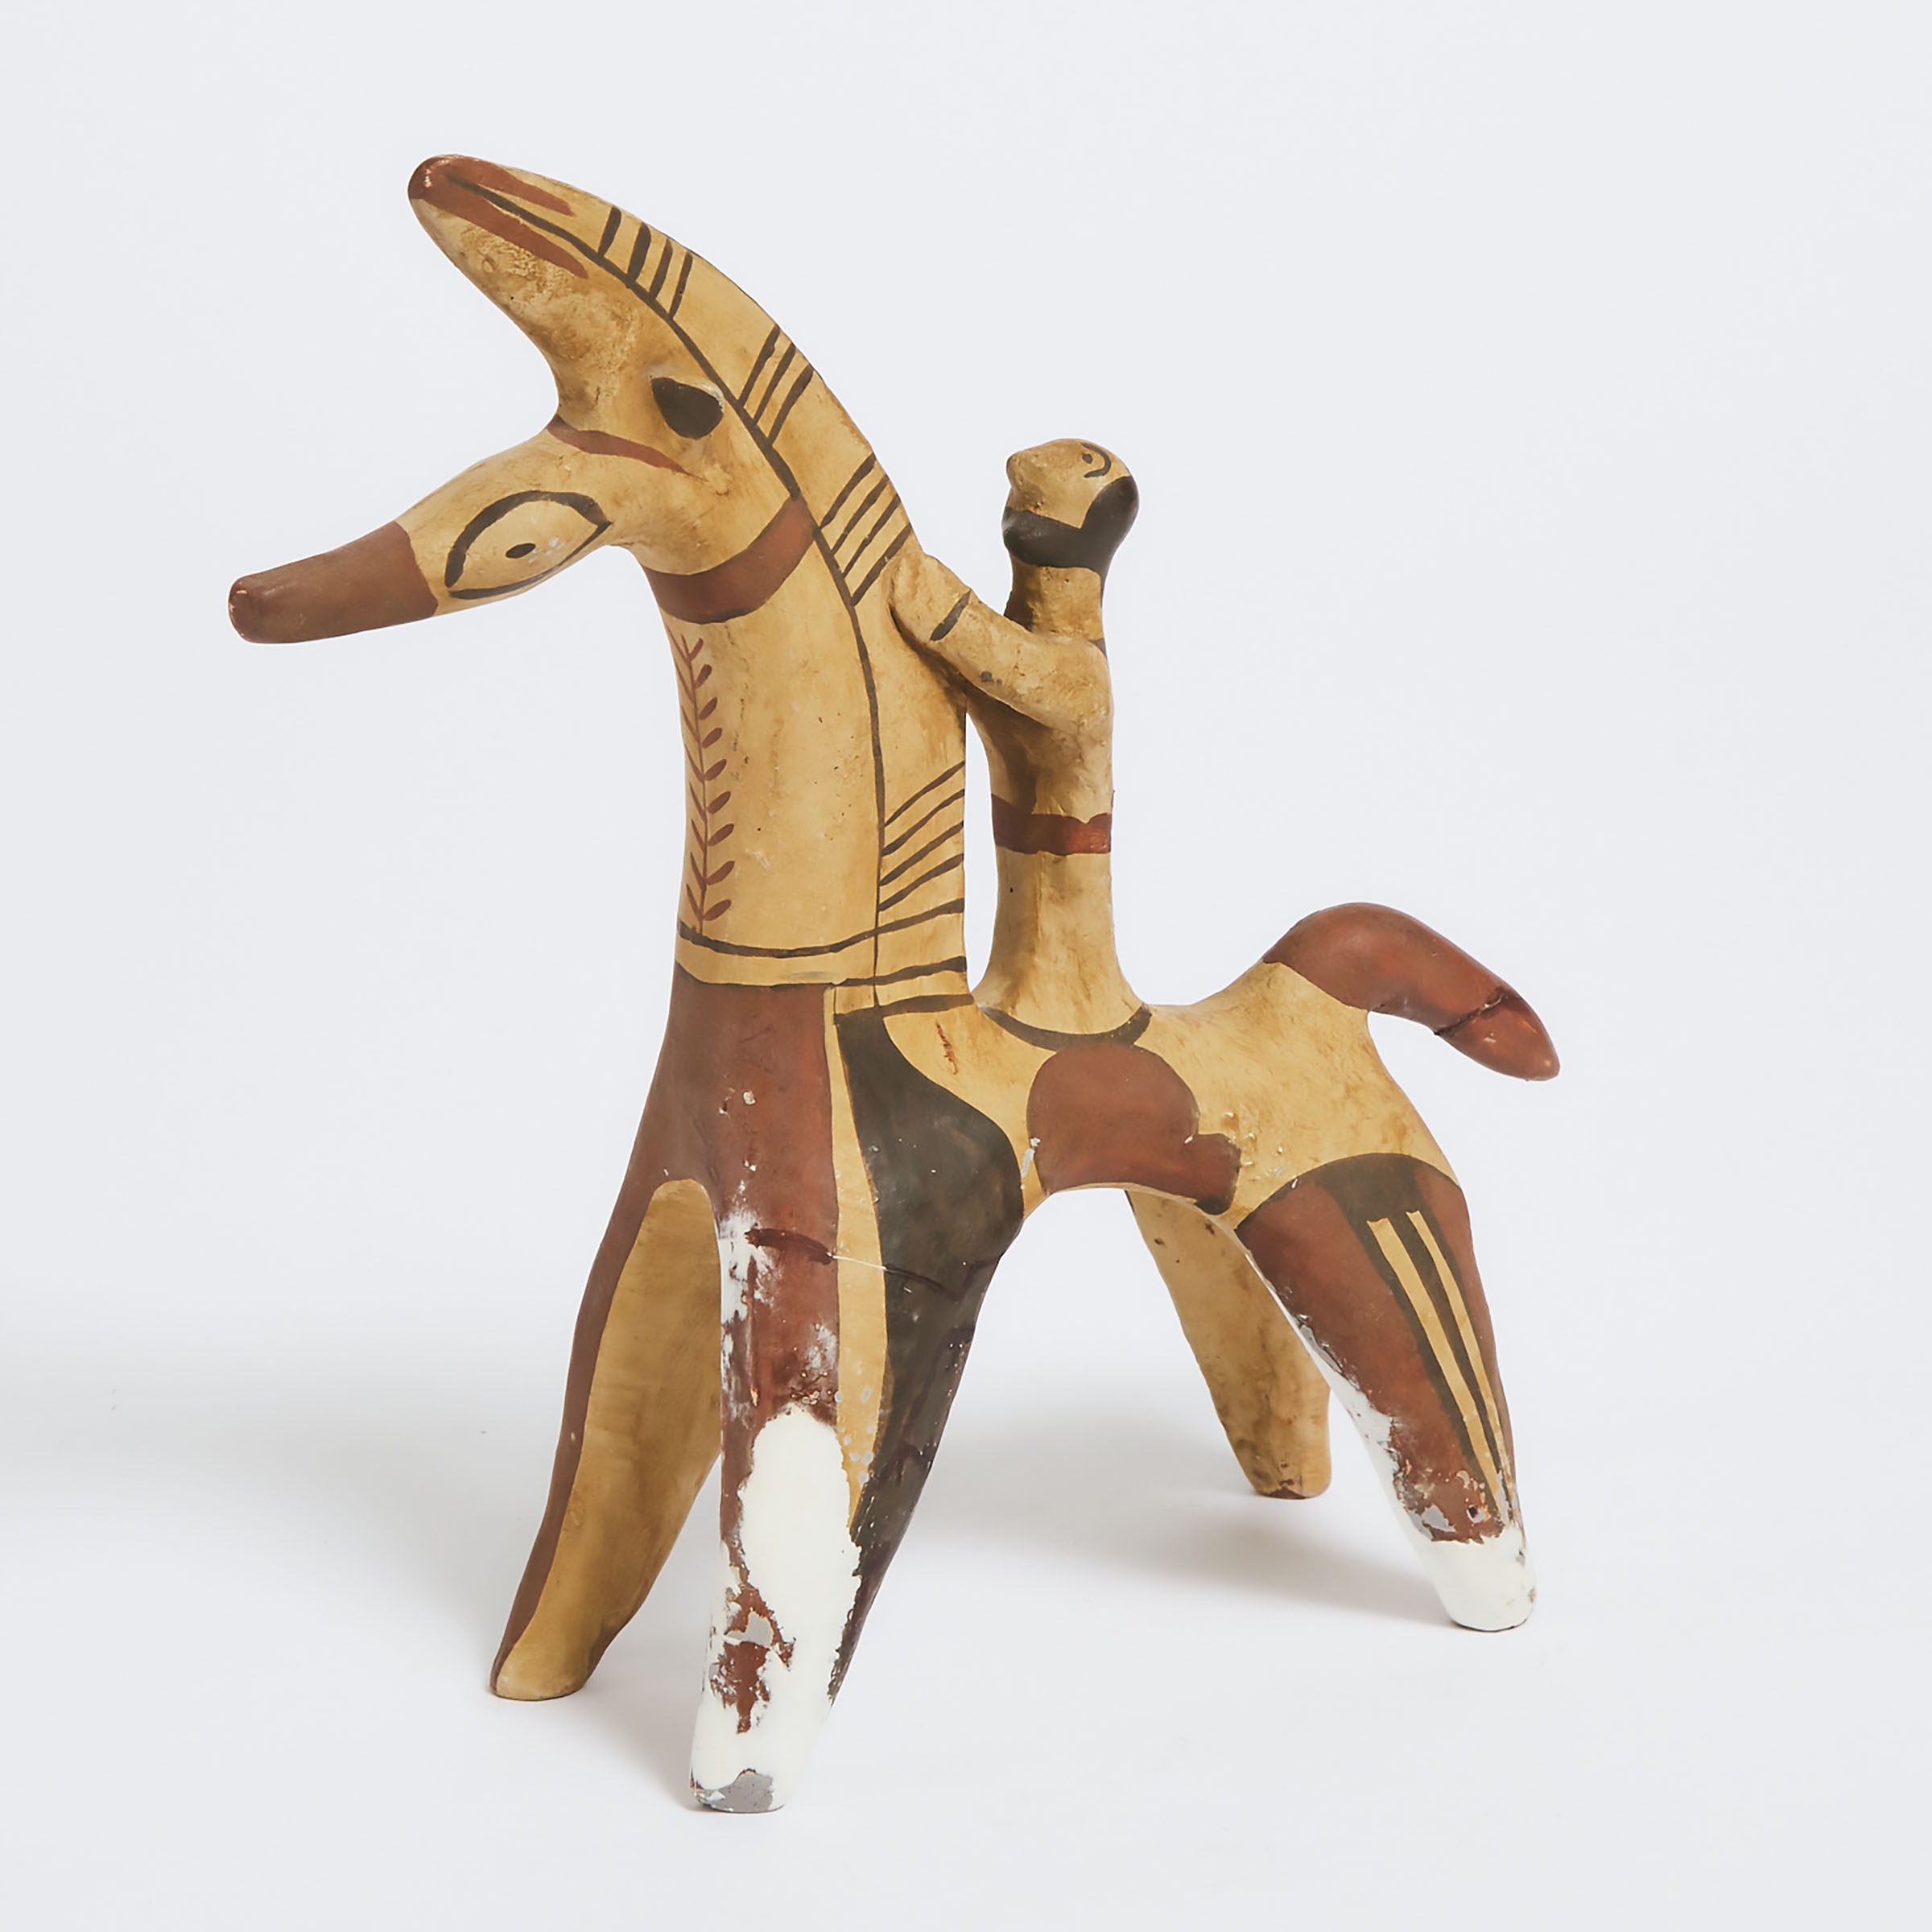 Cypriot (Cyprus) Polychrome Terra Cotta Horse and Rider, Cypro-Archaic, 750-600 B.C.